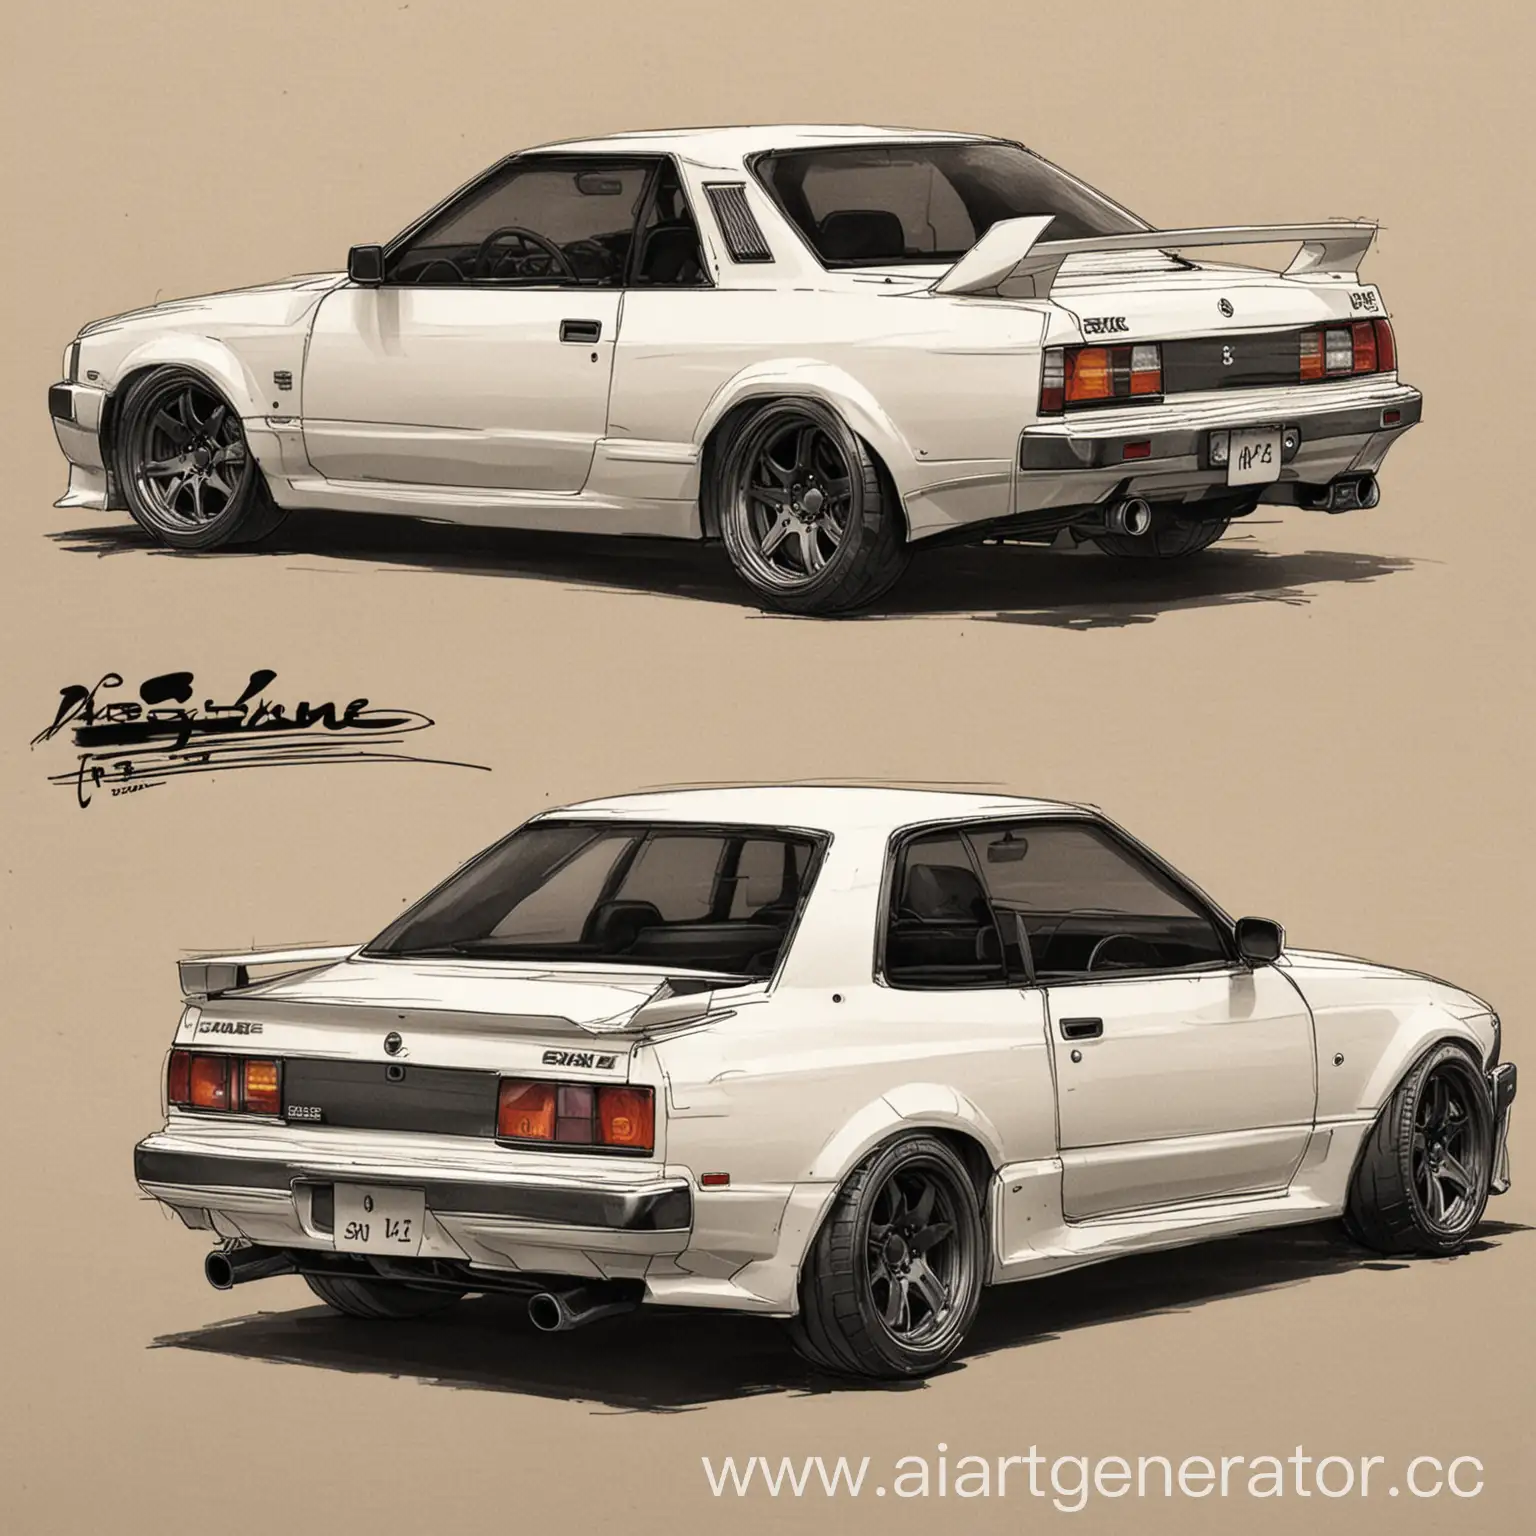 Sketch-of-Nissan-Skyline-R31-from-Rear-View